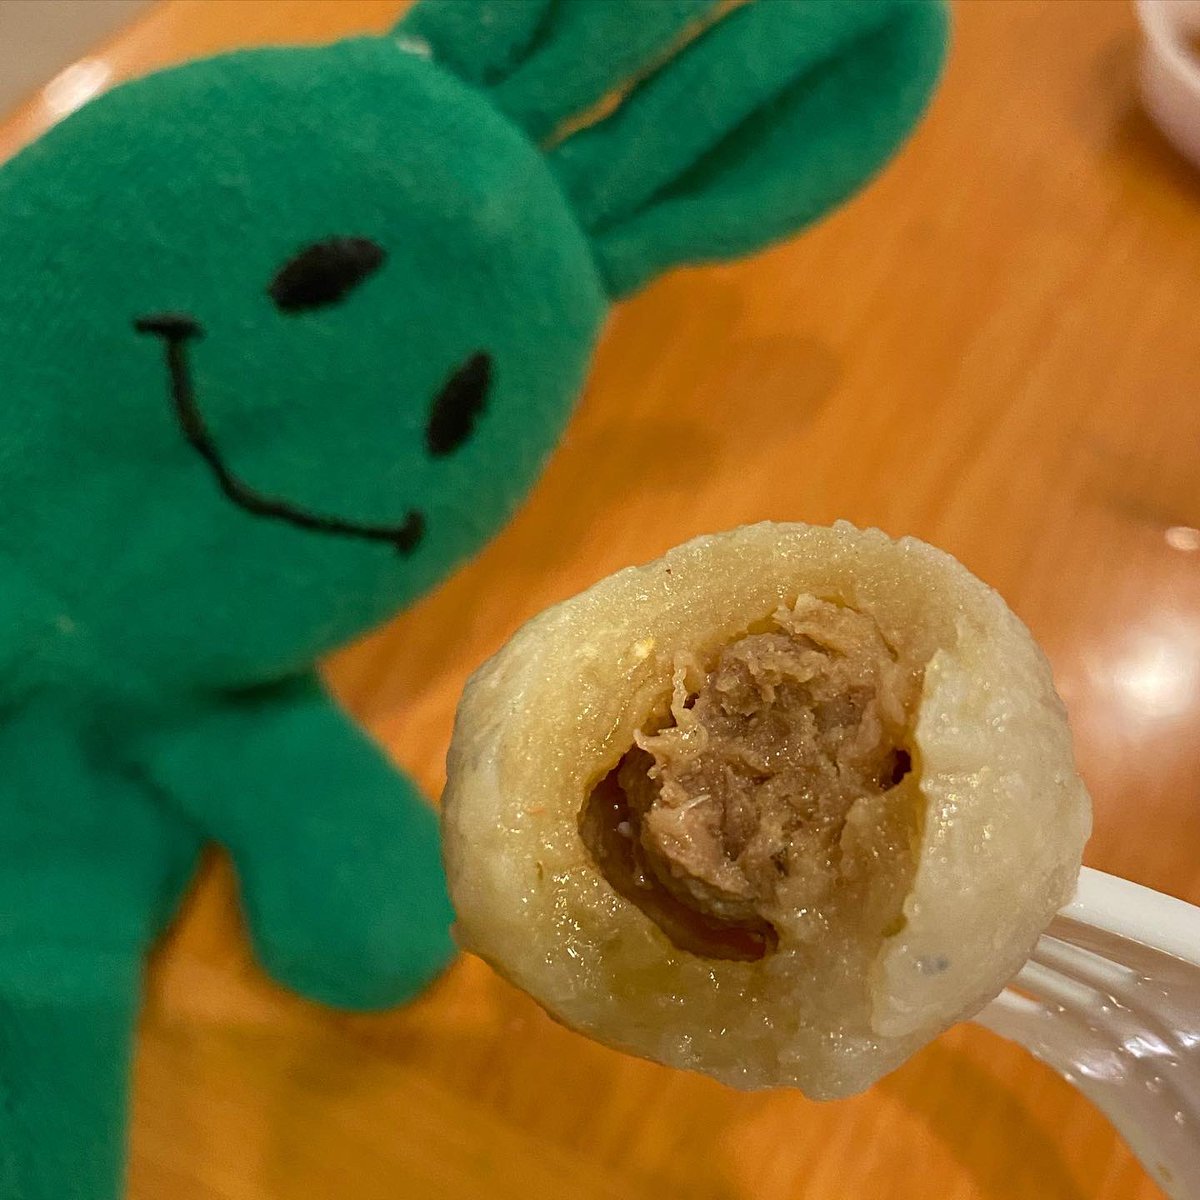 These fishballs have a porky filling!
.
.
.
#rongcityfishball #rongcity #peanutnoodles #dumplings #fishballs #cheapeats #dineinchinatown #chinatown #supportchinatown #les #nyceats